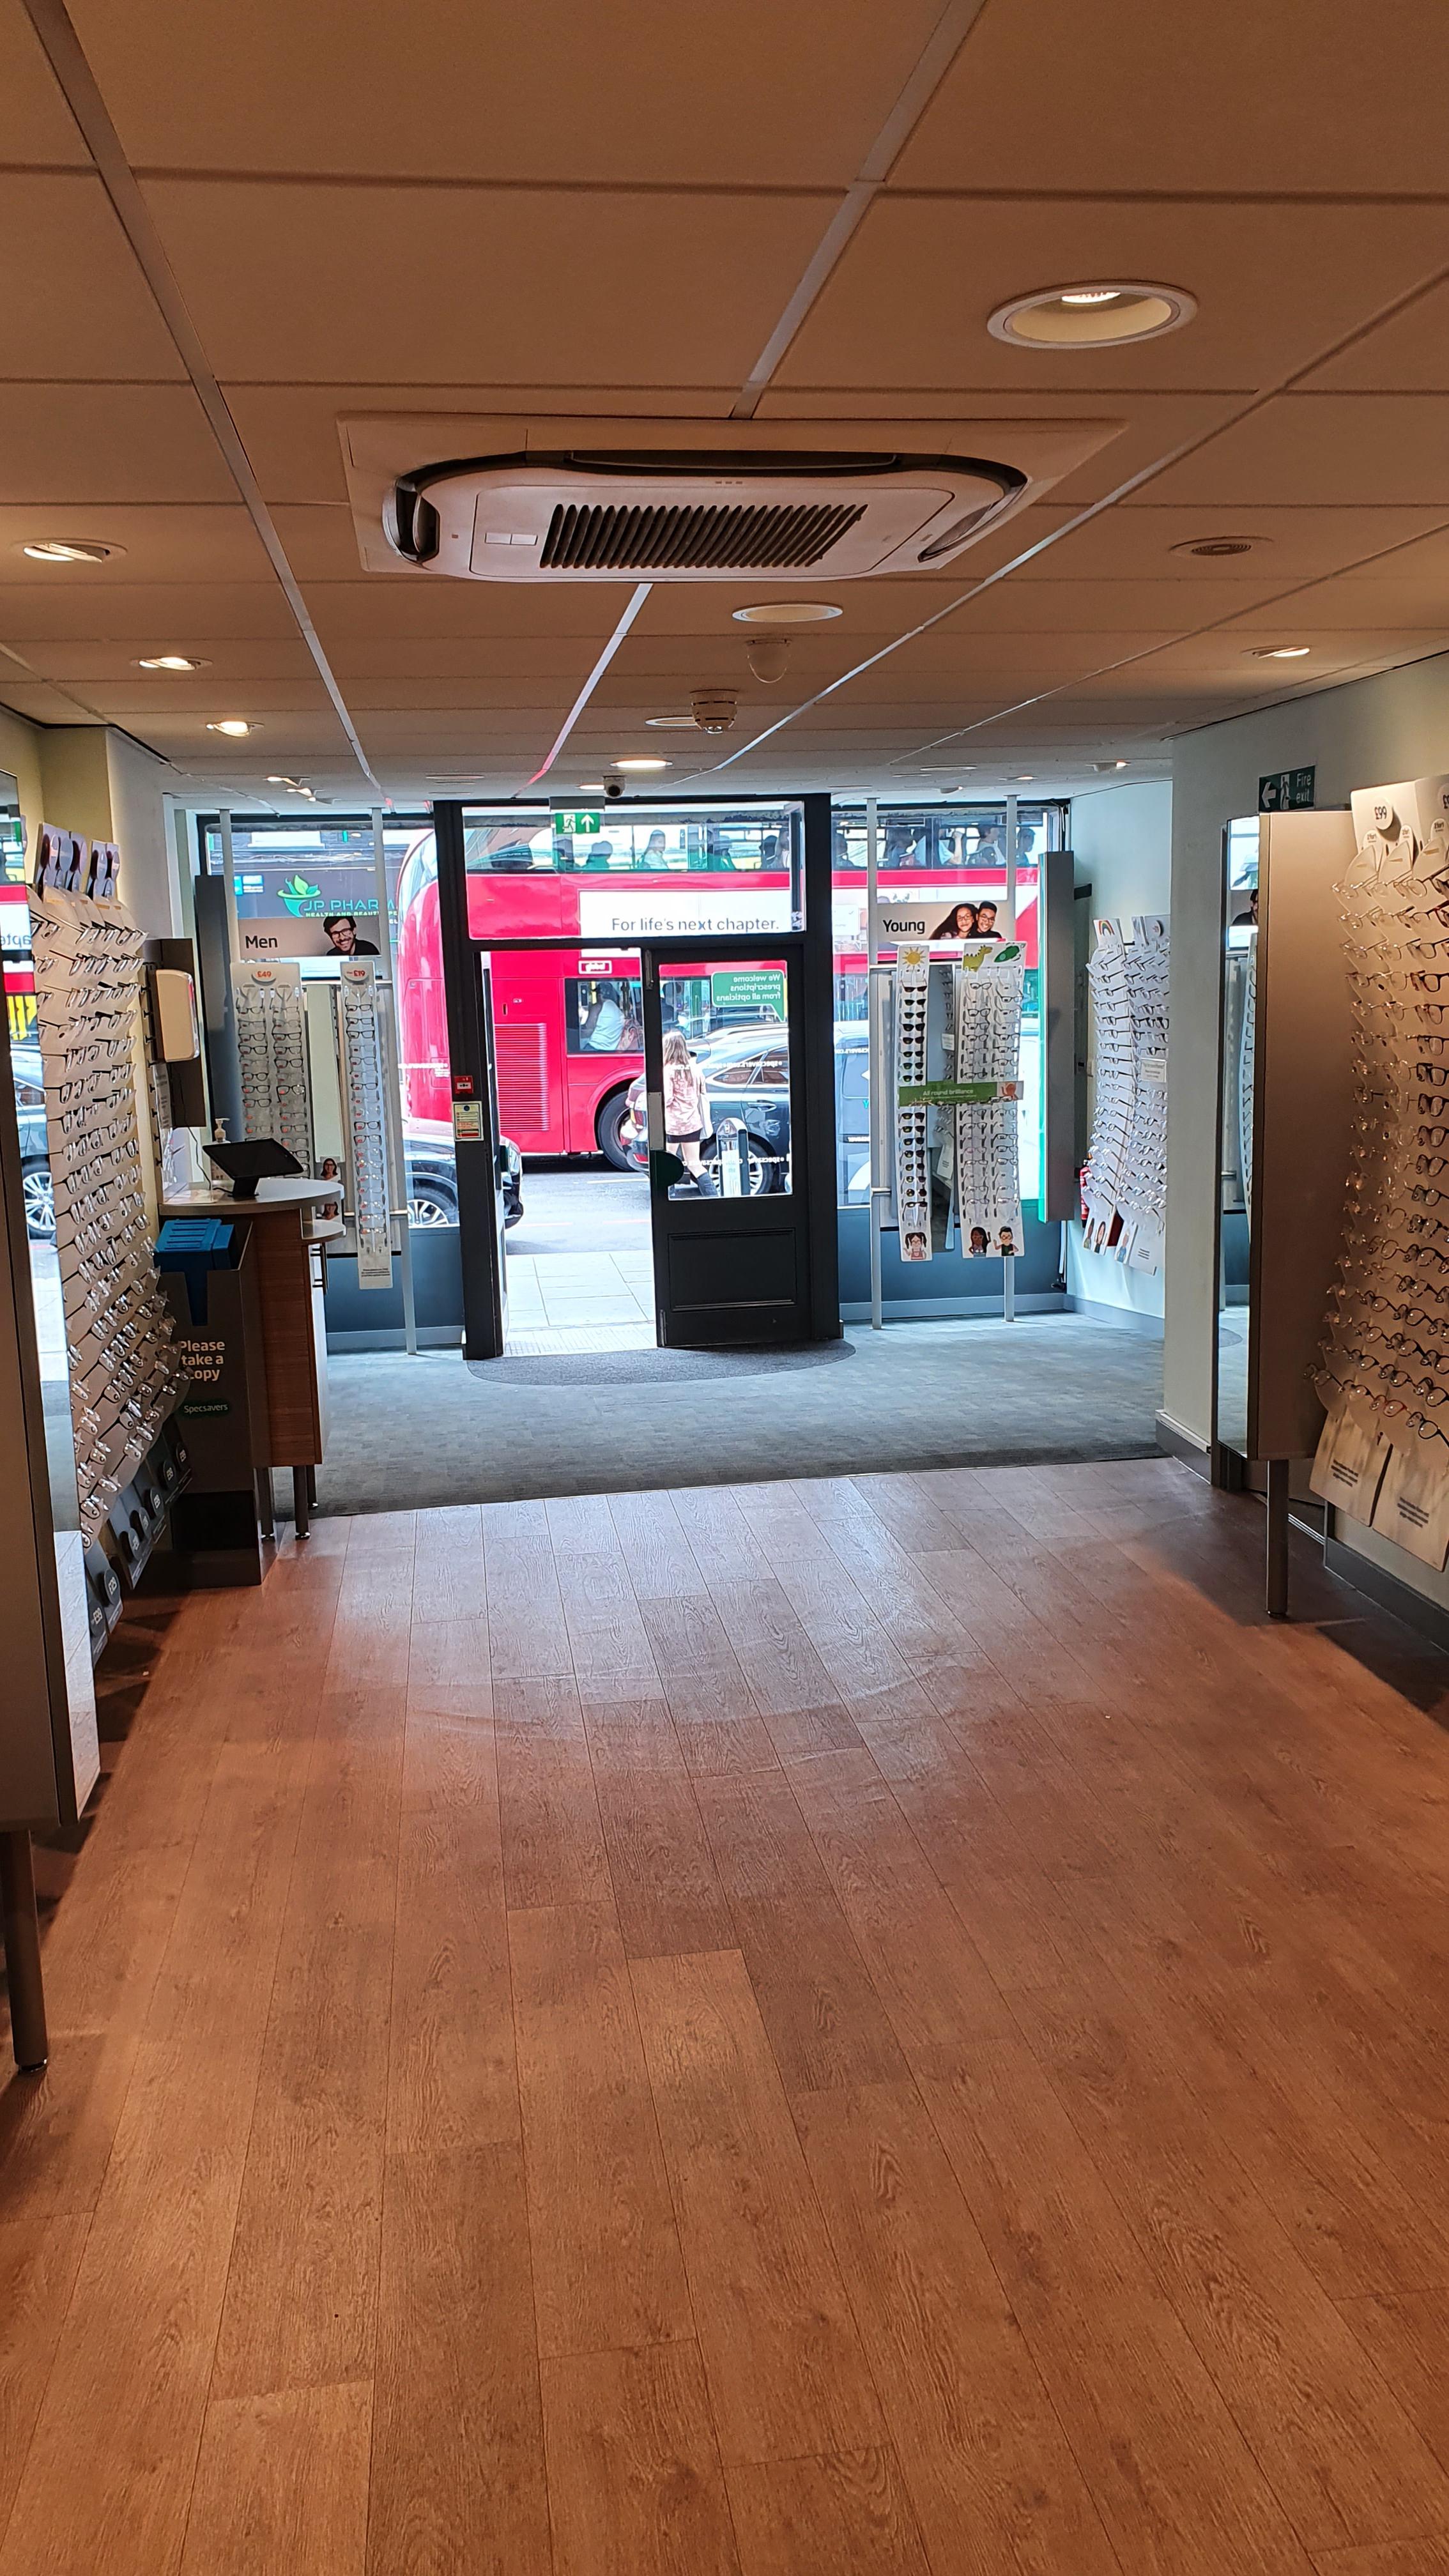 Images Specsavers Opticians and Audiologists - Camden